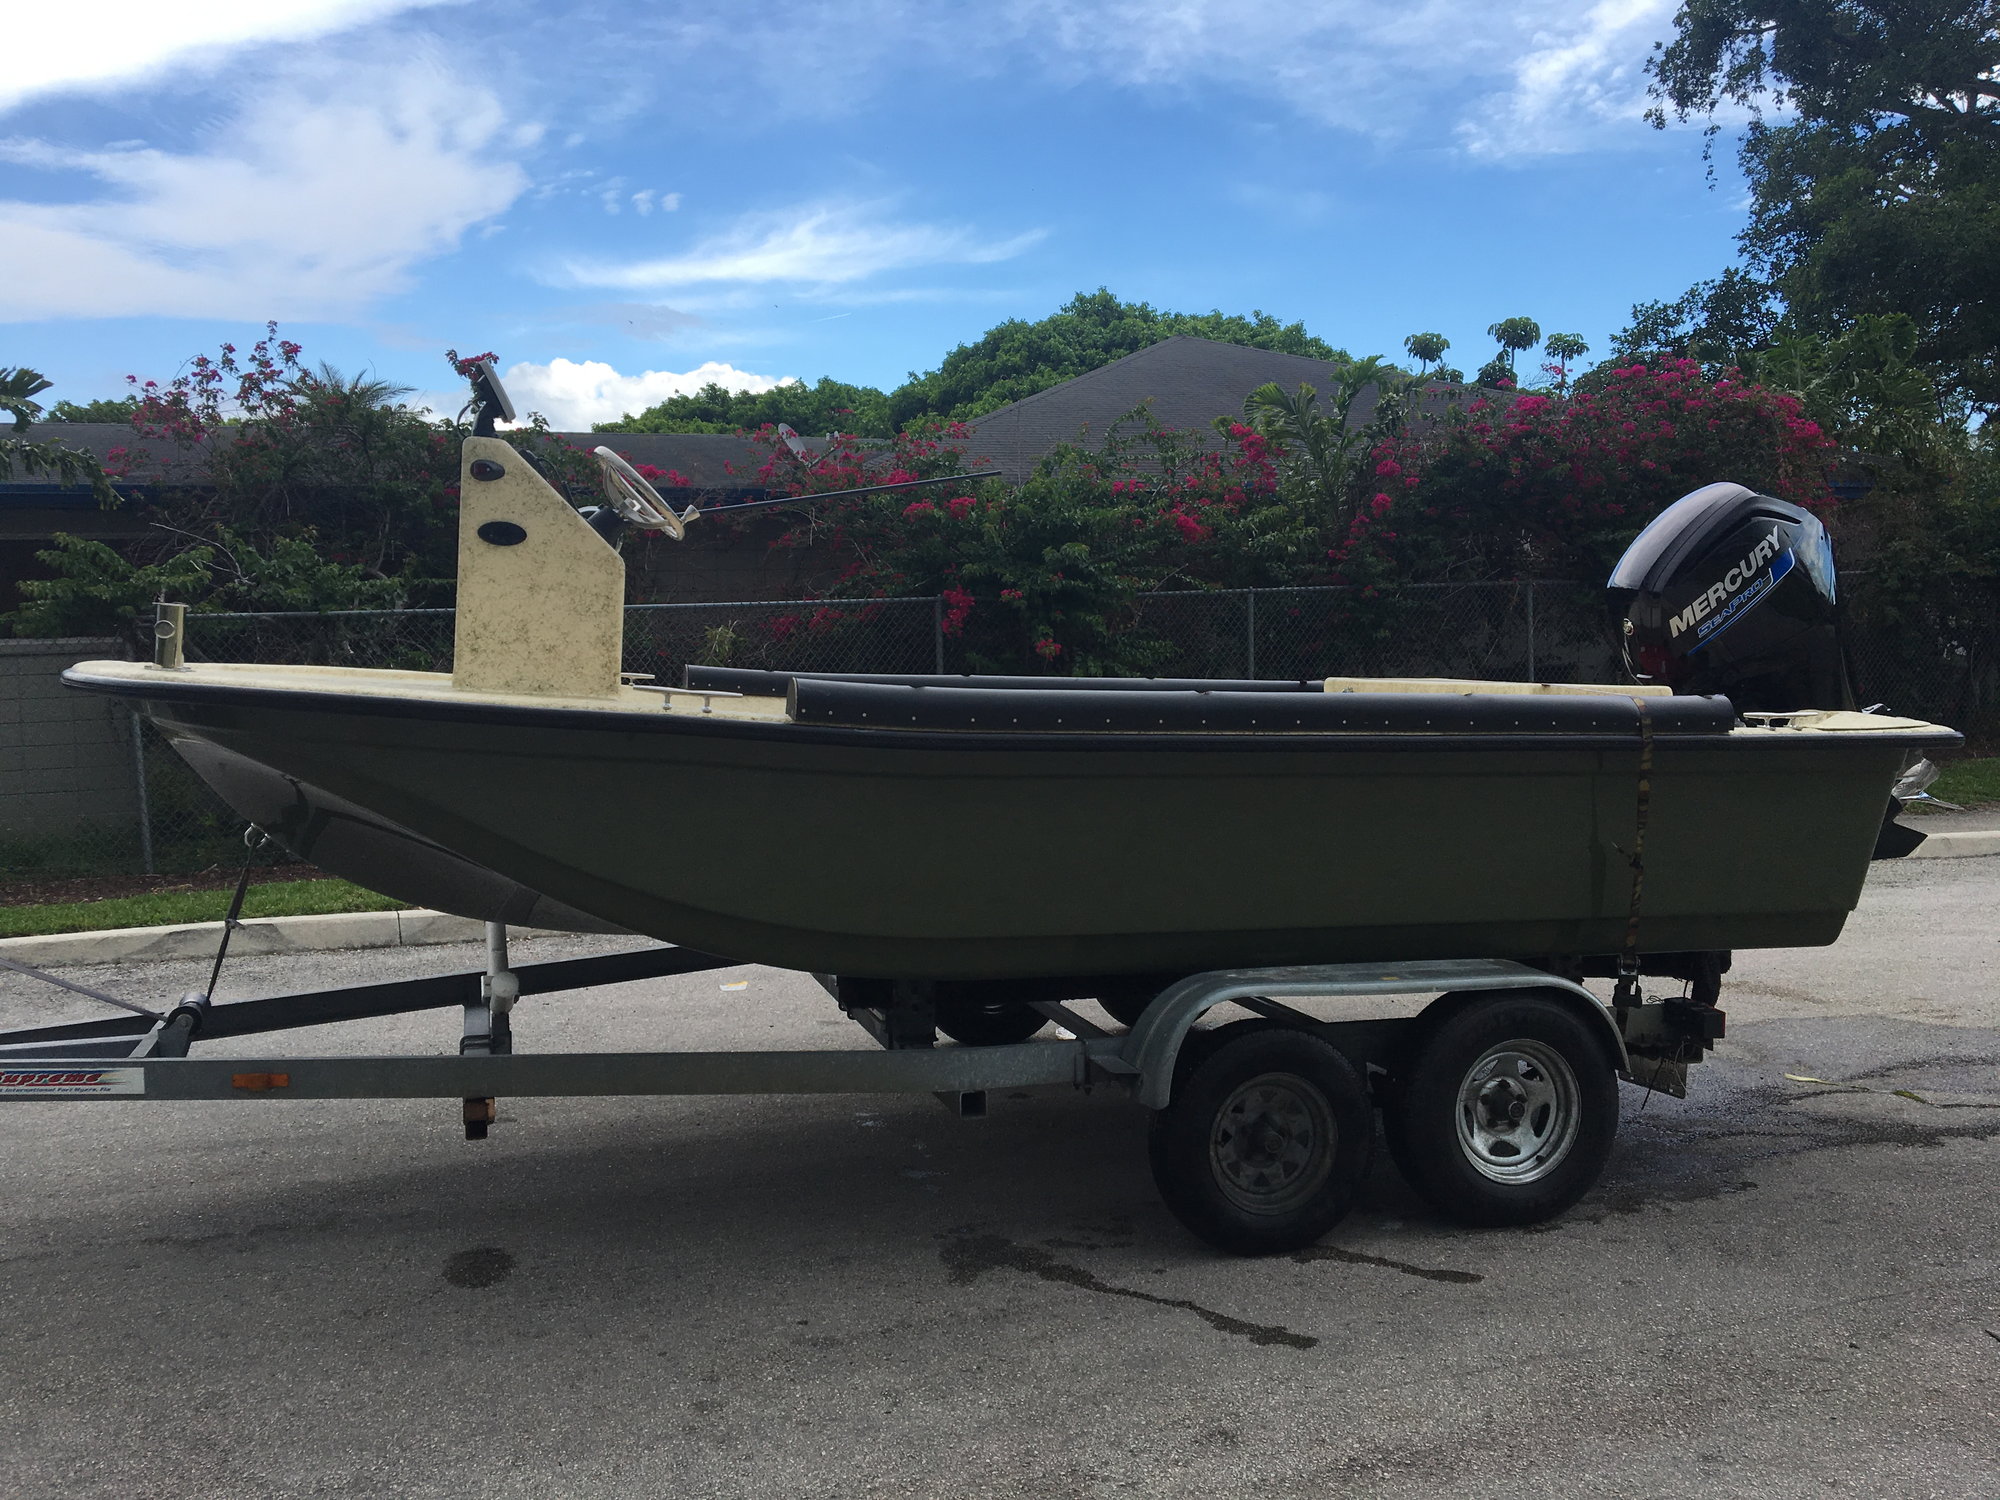 Reef runner boats new build - Page 3 - The Hull Truth - Boating and ...